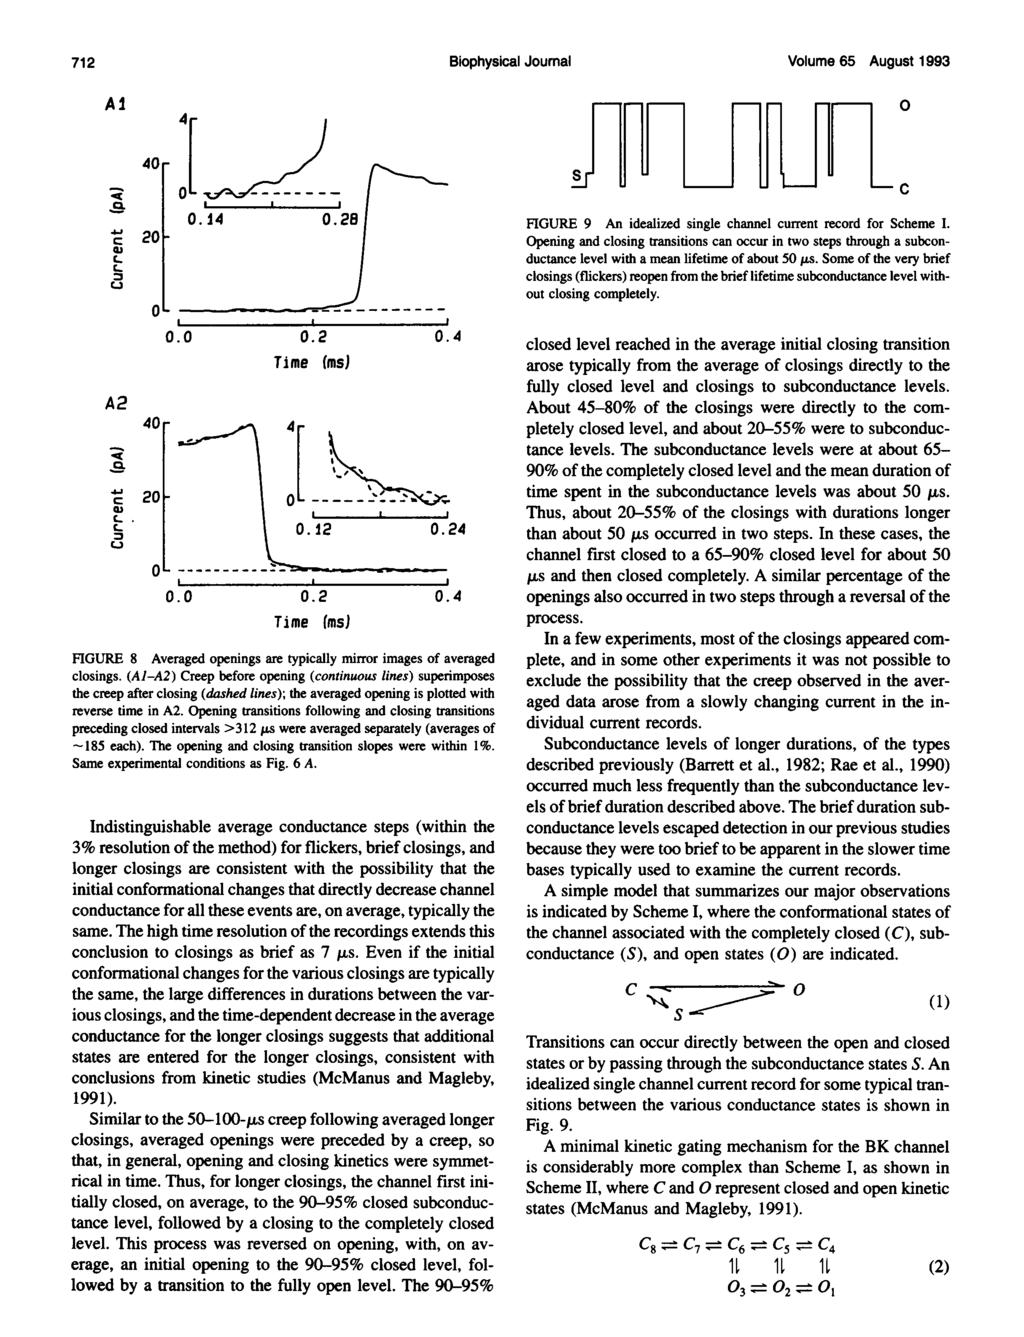 712 Biophysial Journal Al 4 Volume 65 August 1993 SJTFJ7G11C g 3 A2 a u 2 4r 2 -..14.28 _..2.4..2.4 FGURE 8 Averaged openings are typially mirror images of averaged losings.